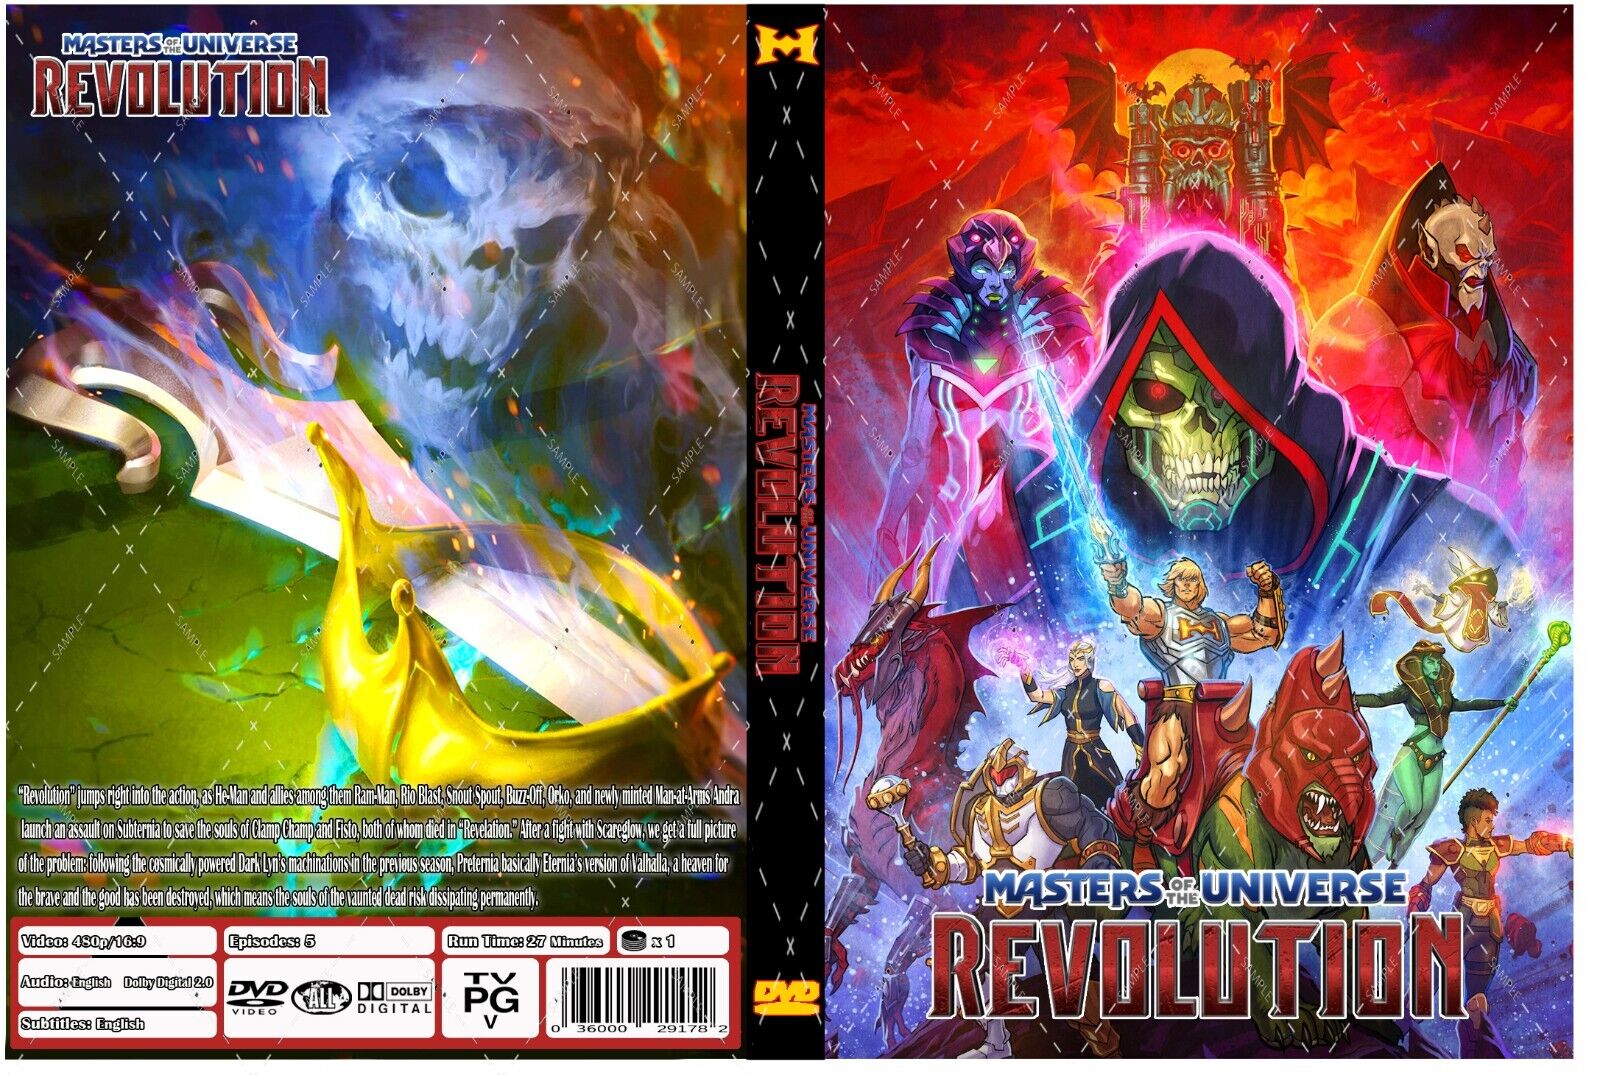 Masters of the Universe Revolution Animated Series English Audio